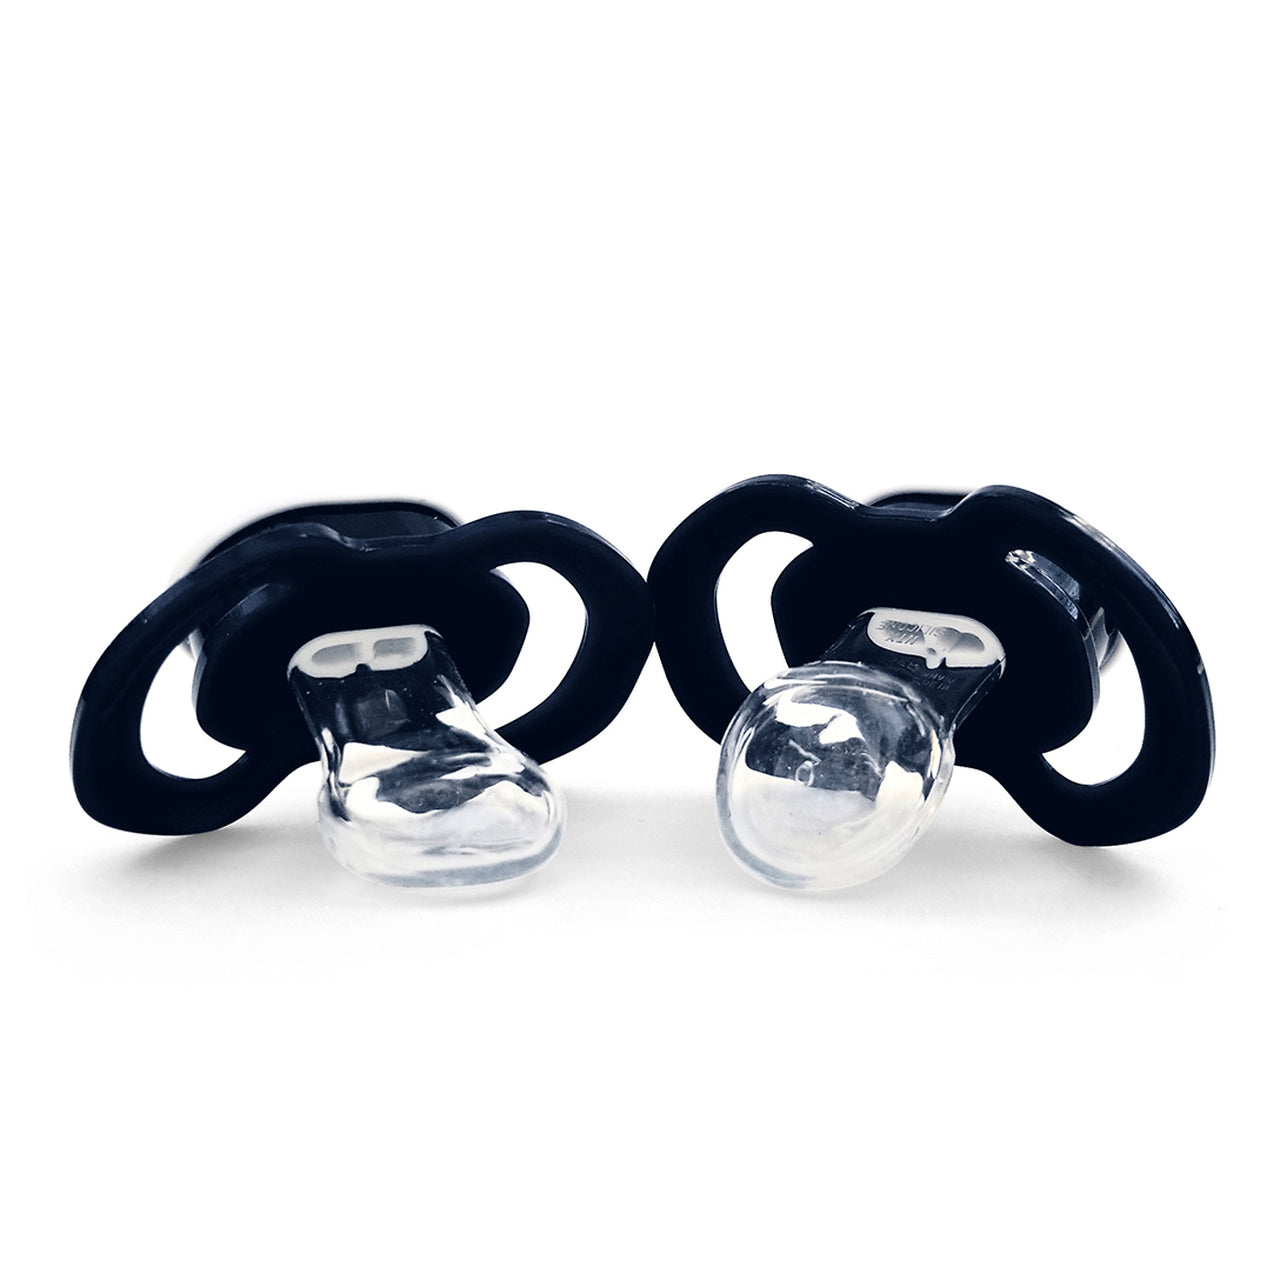 CHICAGO BEARS 2-PACK PACIFIERS